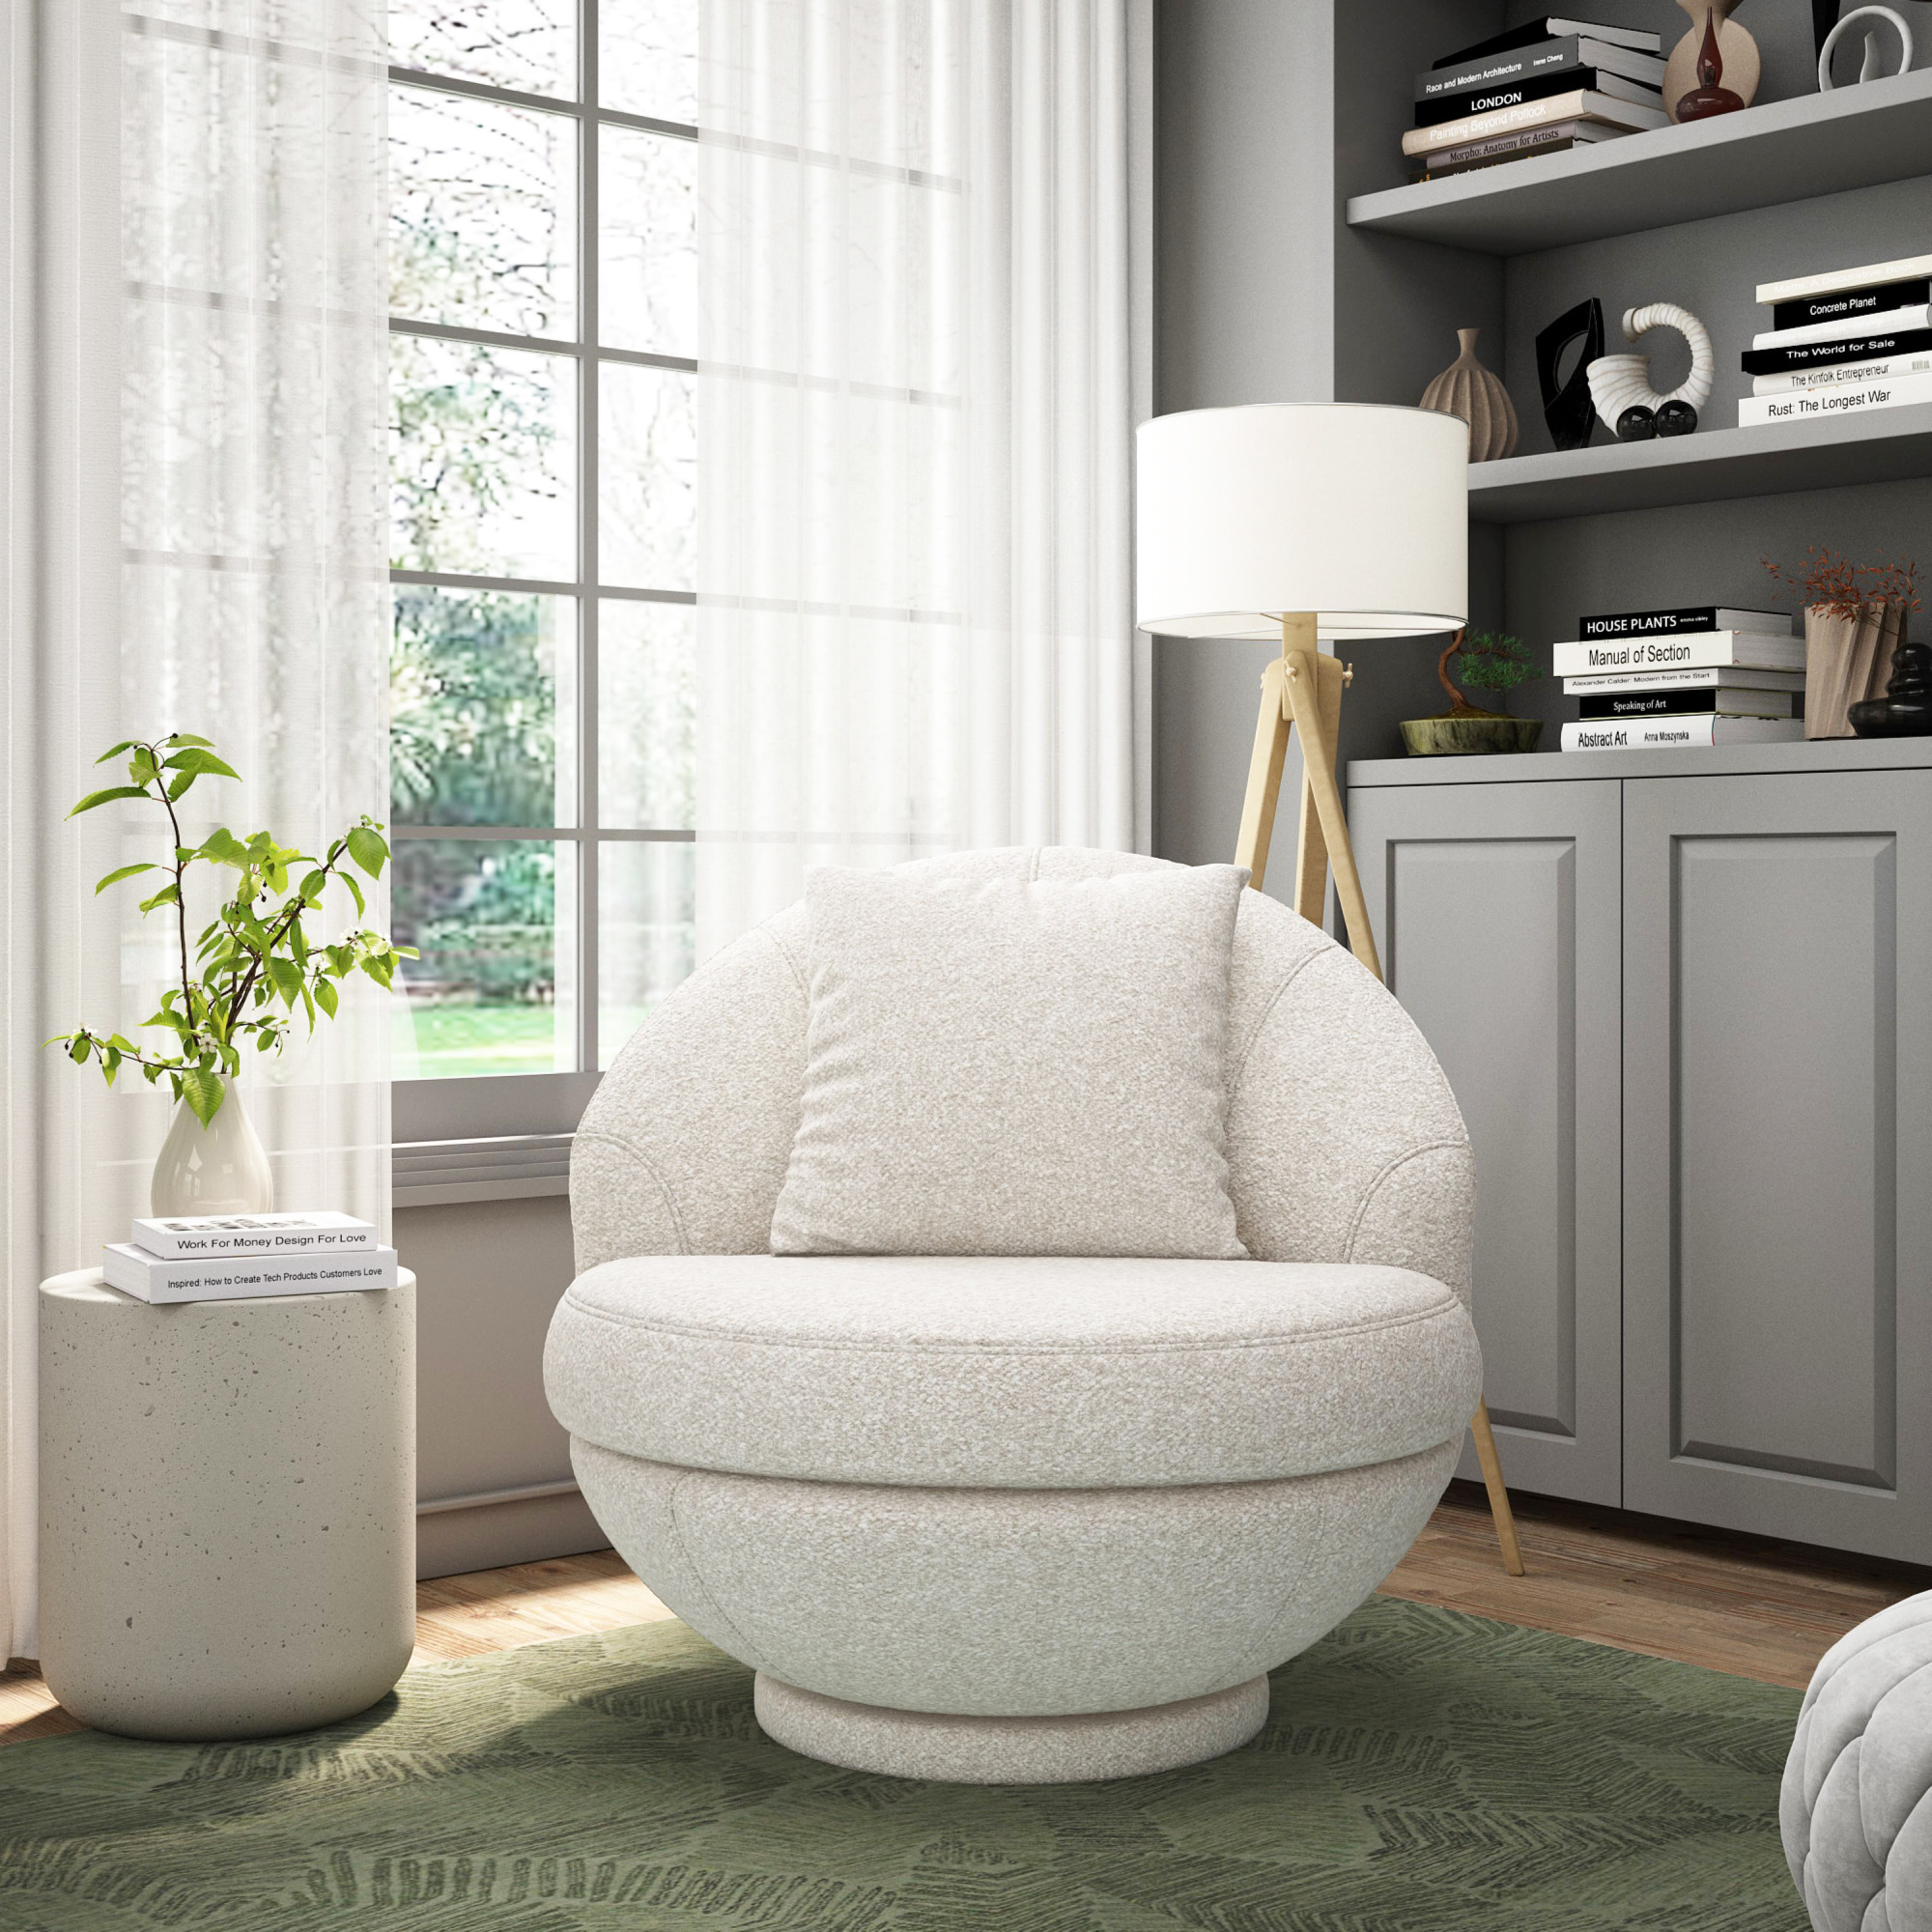 Hillsdale Boulder Upholstered Swivel Storage Chair, Ash White - image 2 of 22